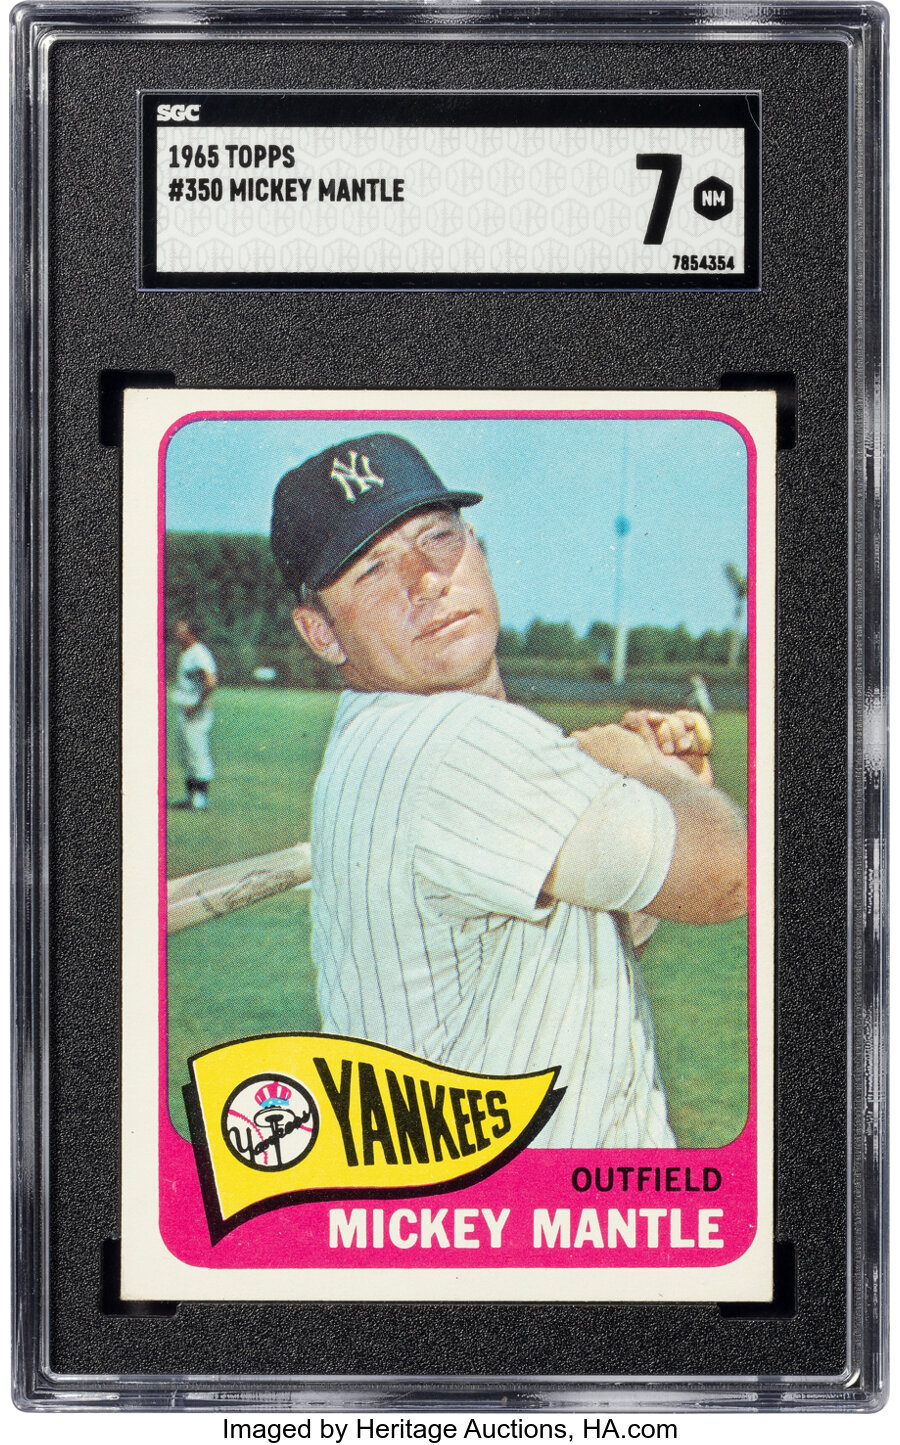 1965 Topps Mickey Mantle #350 SGC NM 7